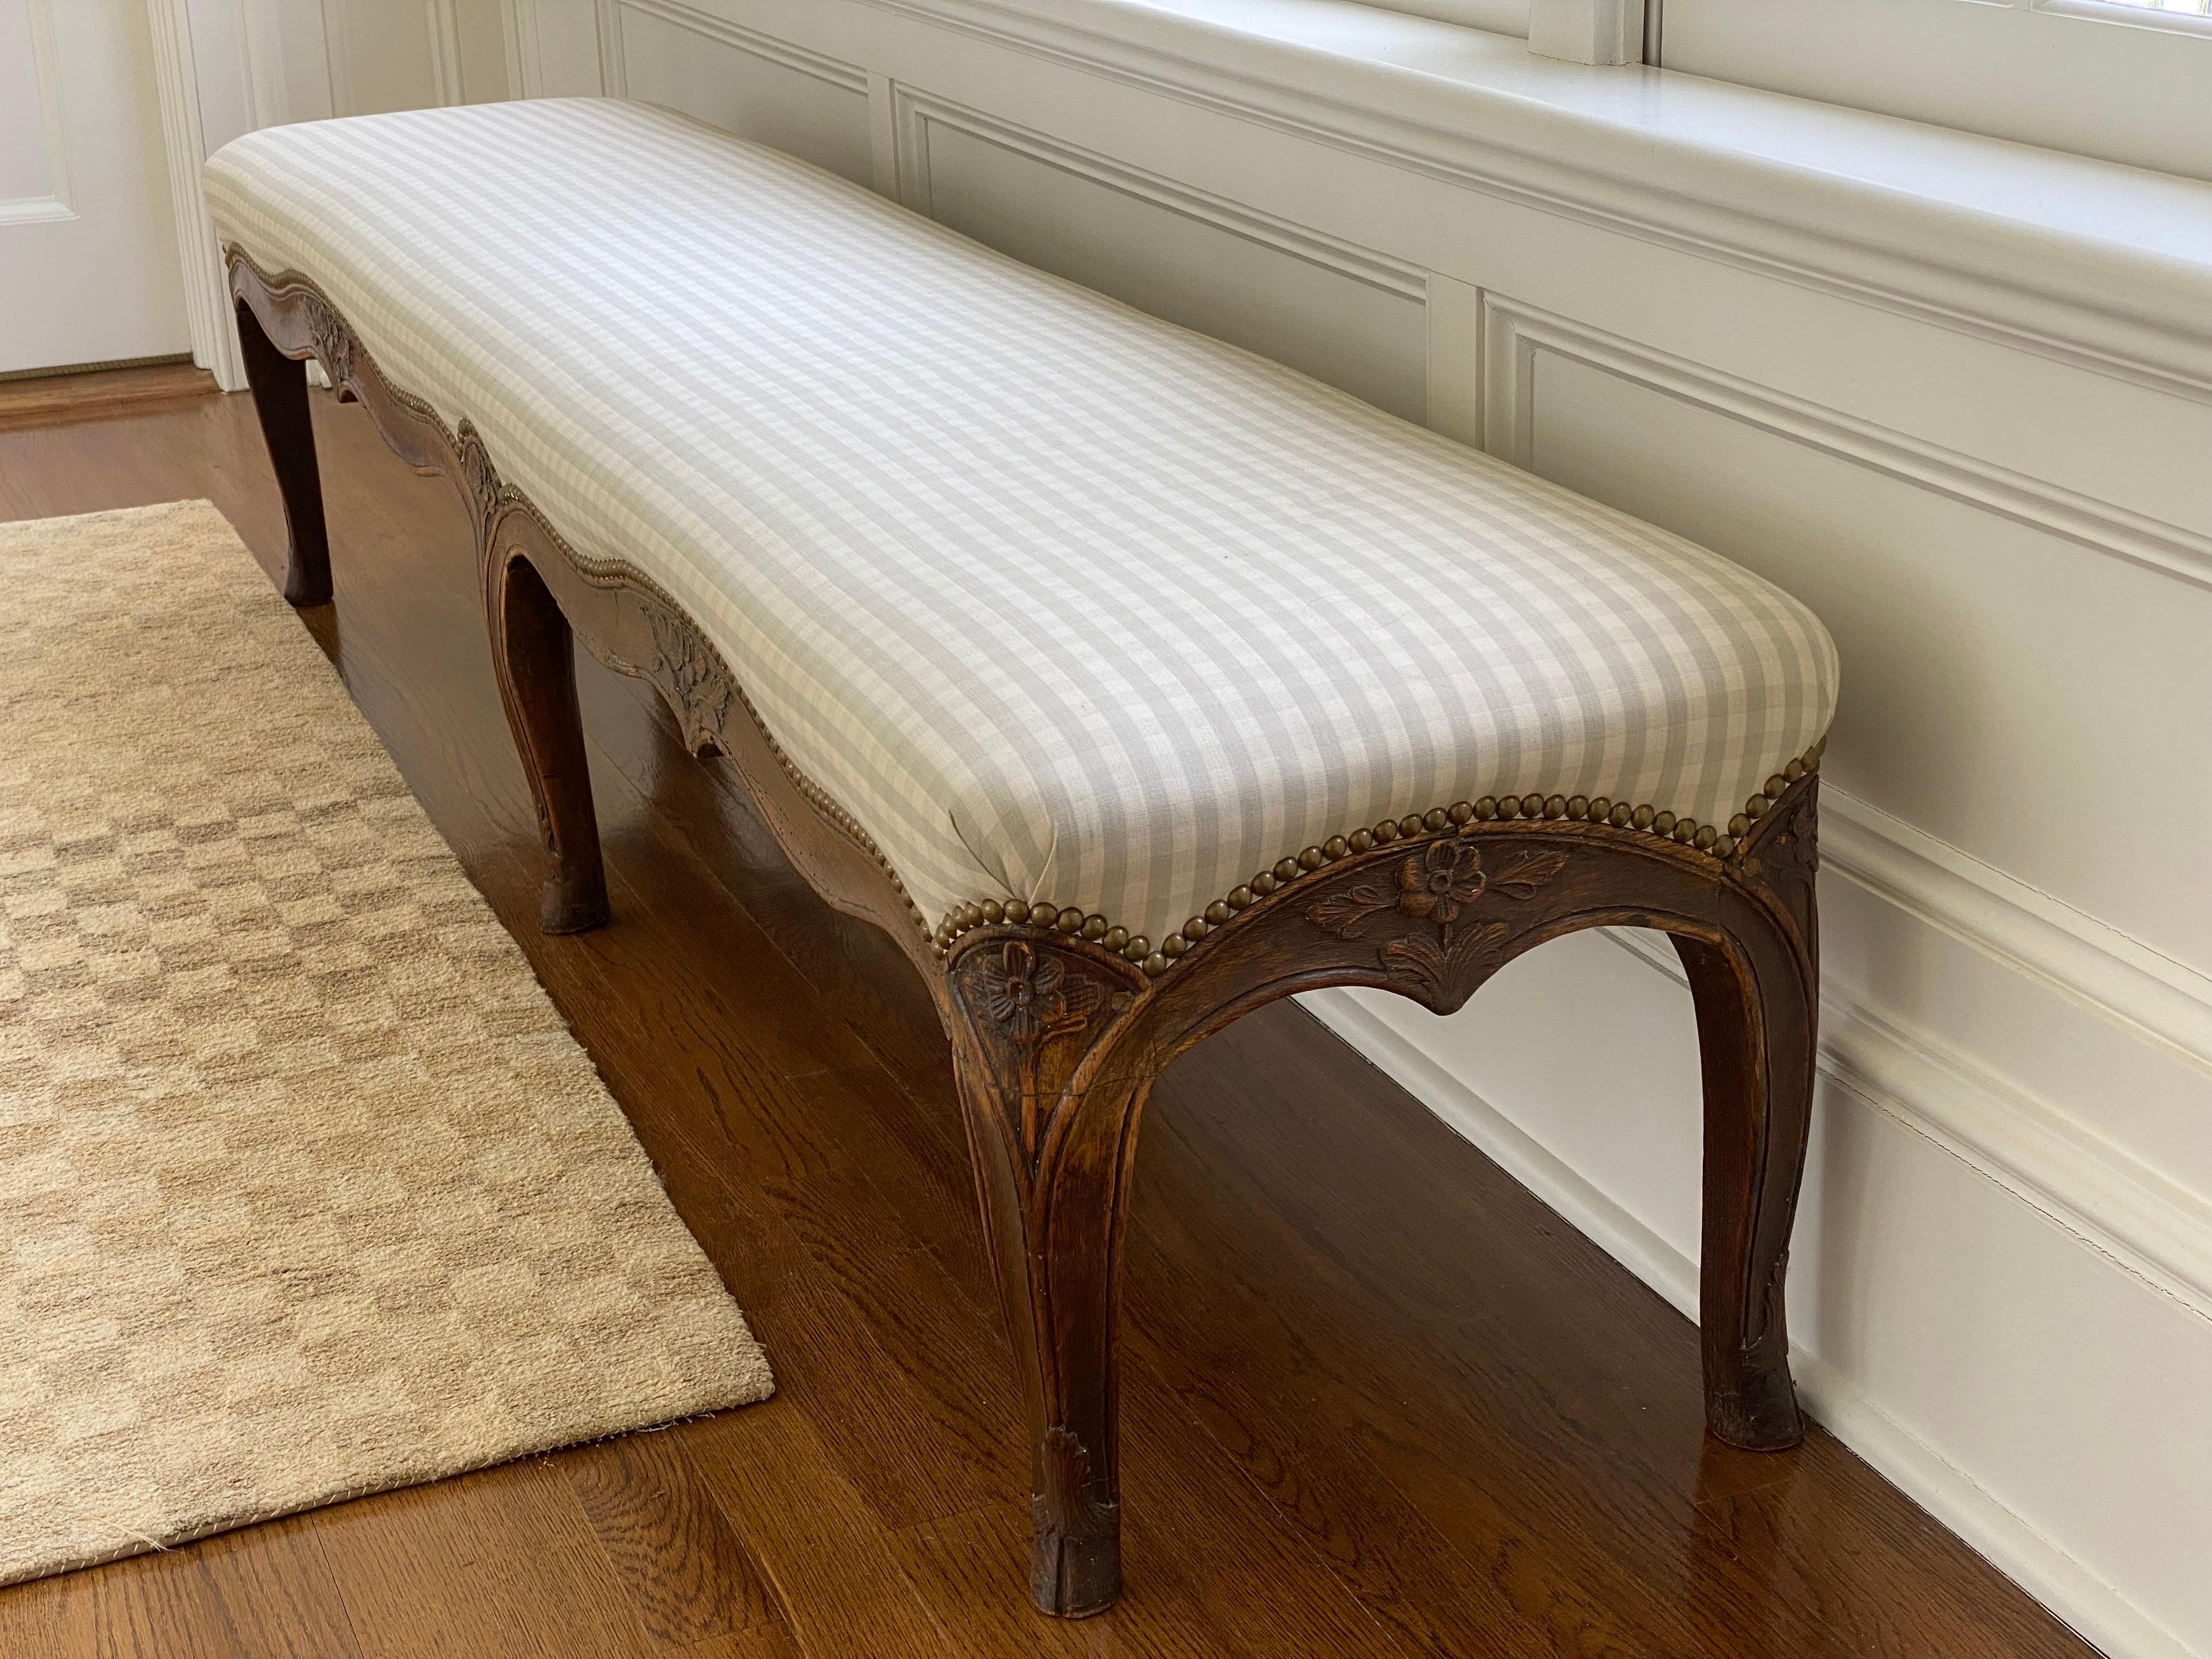 19th century French Louis XV upholstered bench
Hand-carved in Oak, decorated with floral motif on curving cabriole legs. Aged brass nail heads along perimeter. Grey & White check fabric in very good condition. 
Some chips and loss to carving,